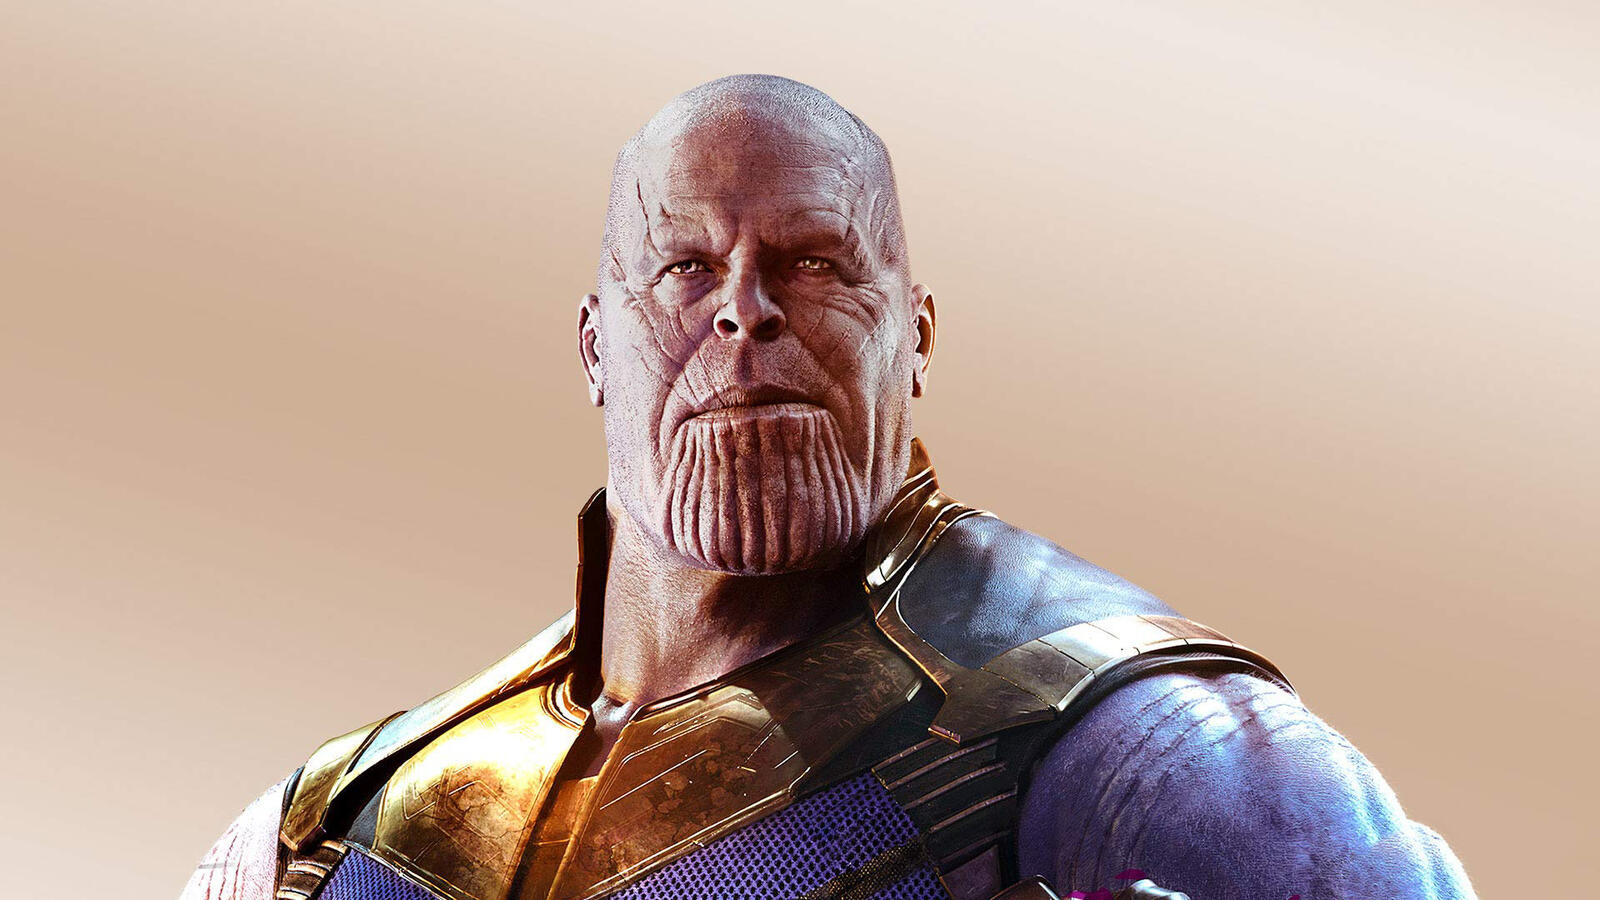 Wallpapers Thanos Avengers Infinity War movies on the desktop